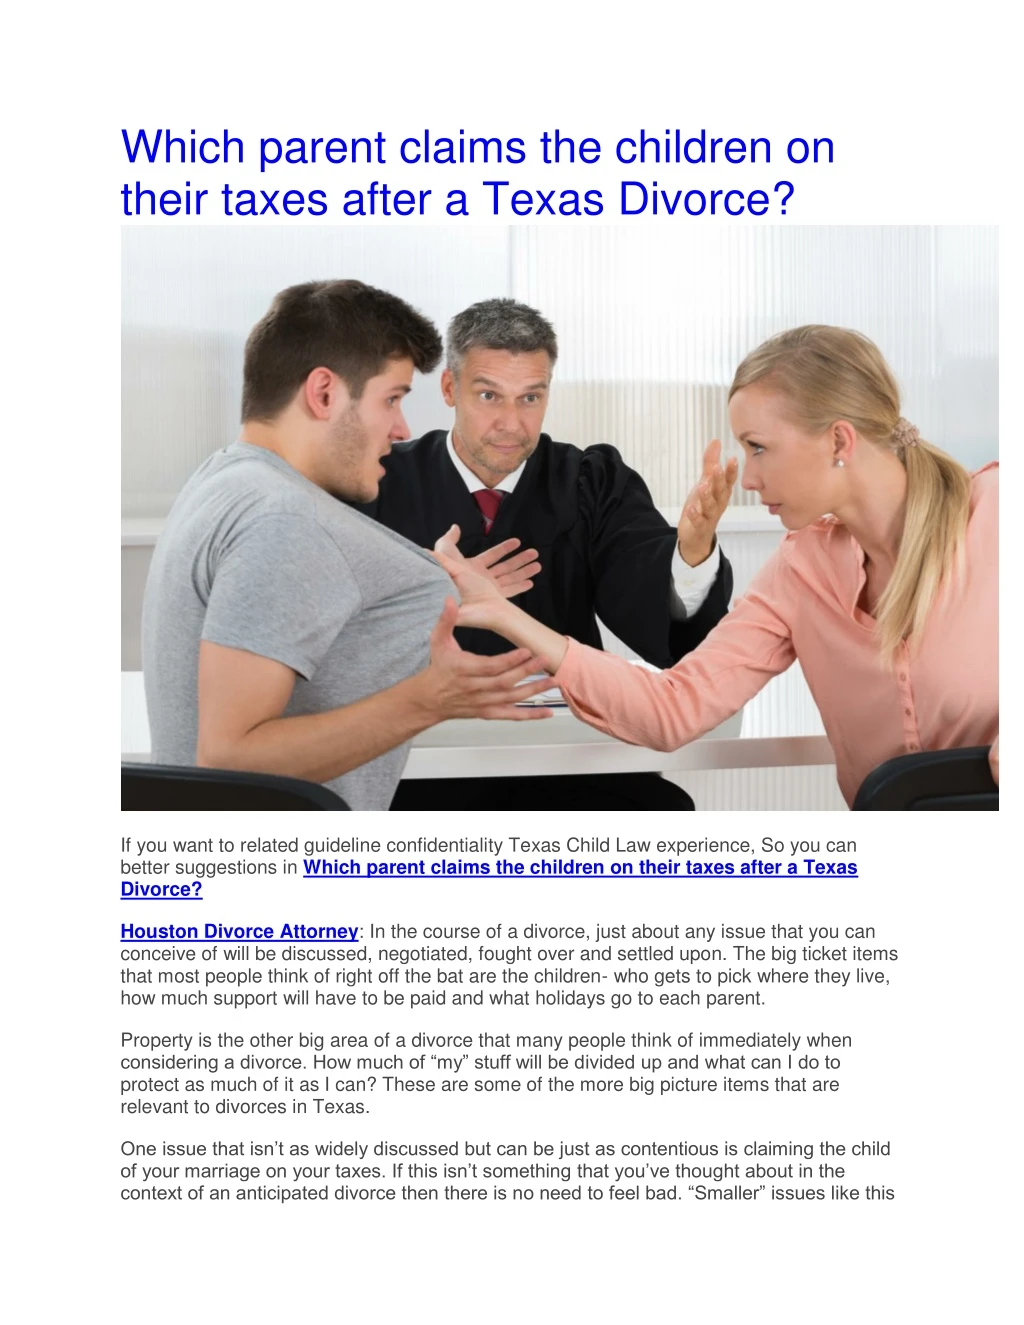 which parent claims the children on their taxes